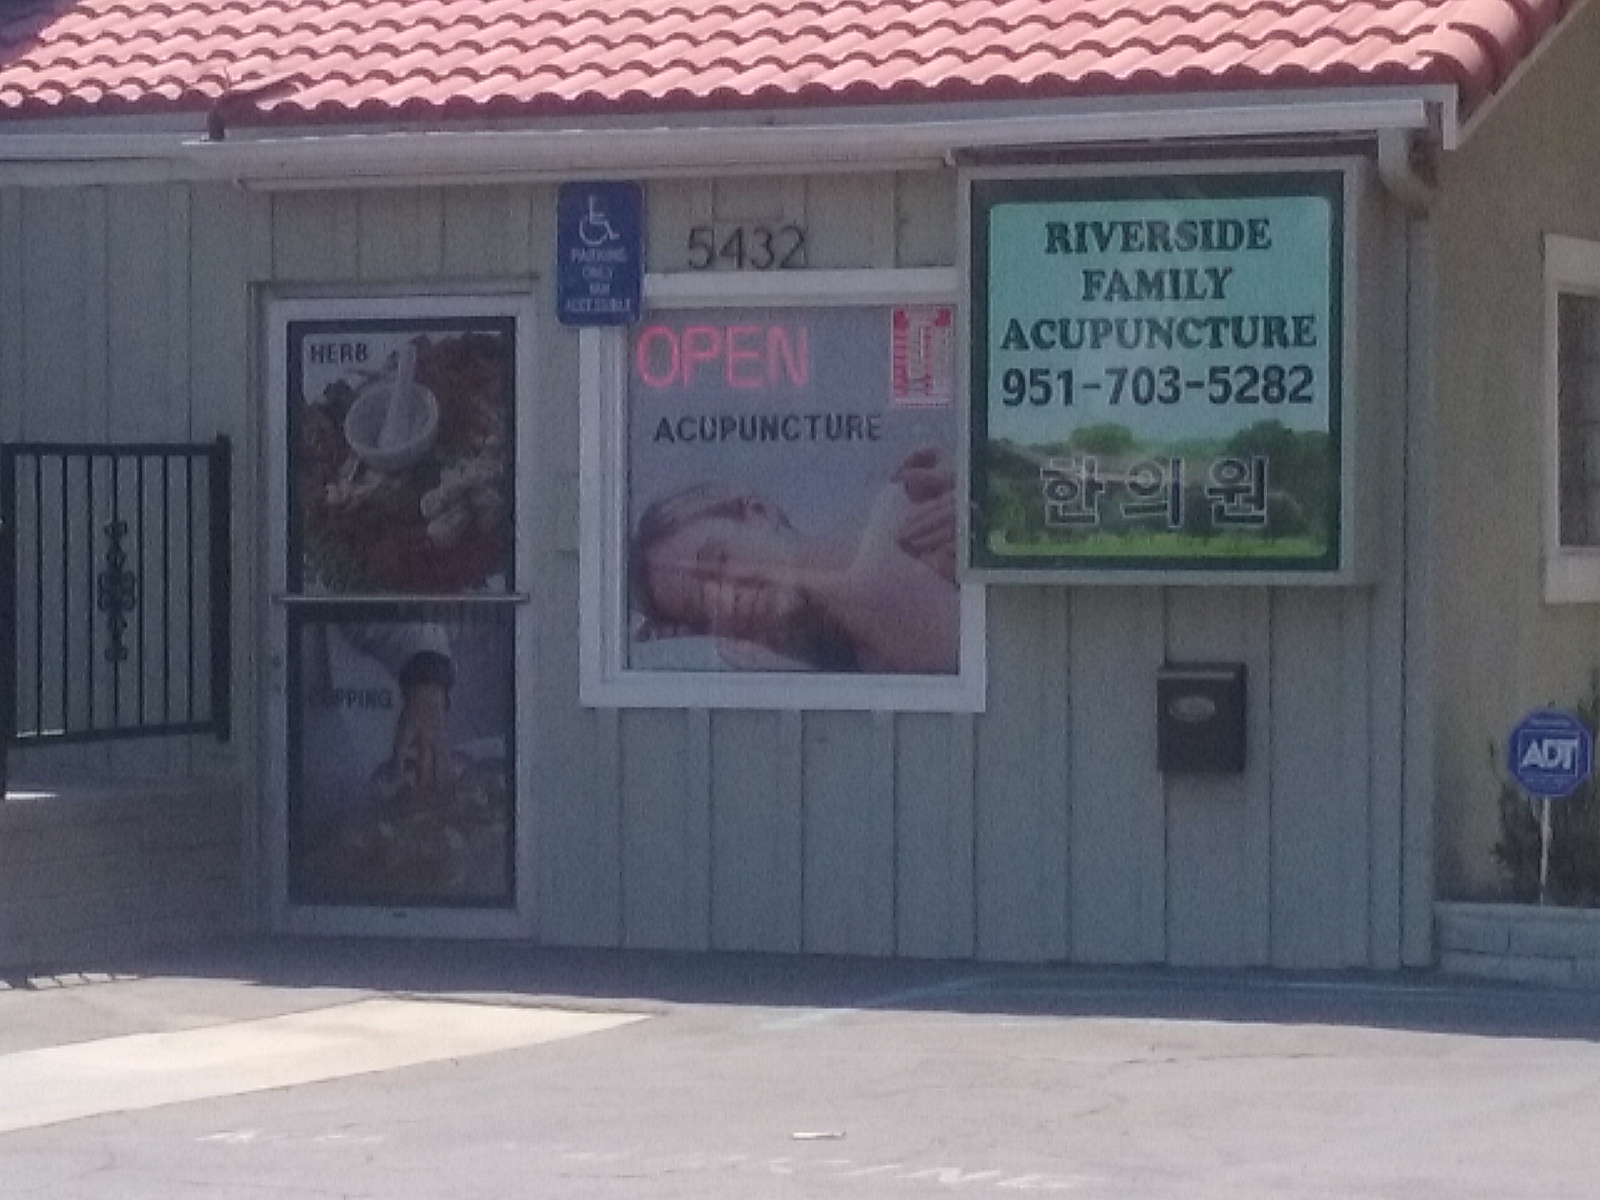 Riverside Family Acupuncture